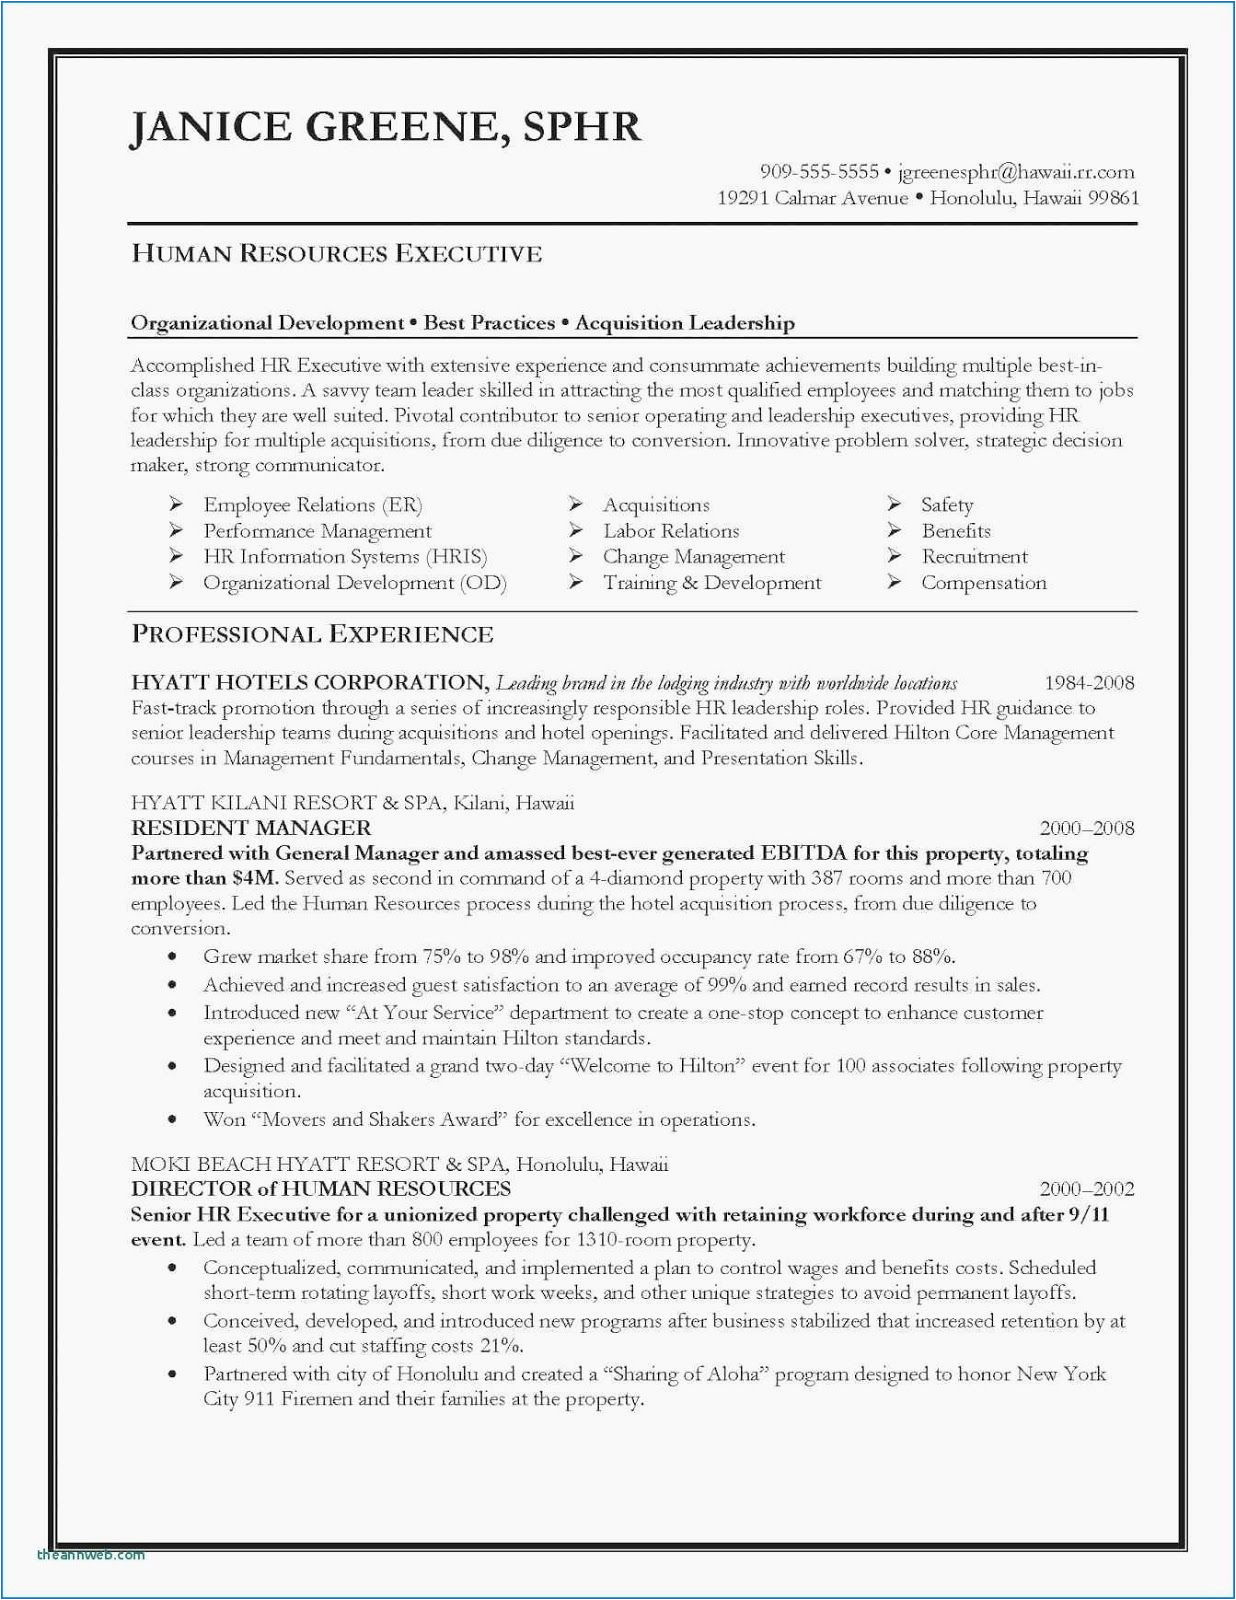 Compensation and Benefits Analyst Resume Sample Benefits Analyst Resume Sample Benefits Analyst Resume